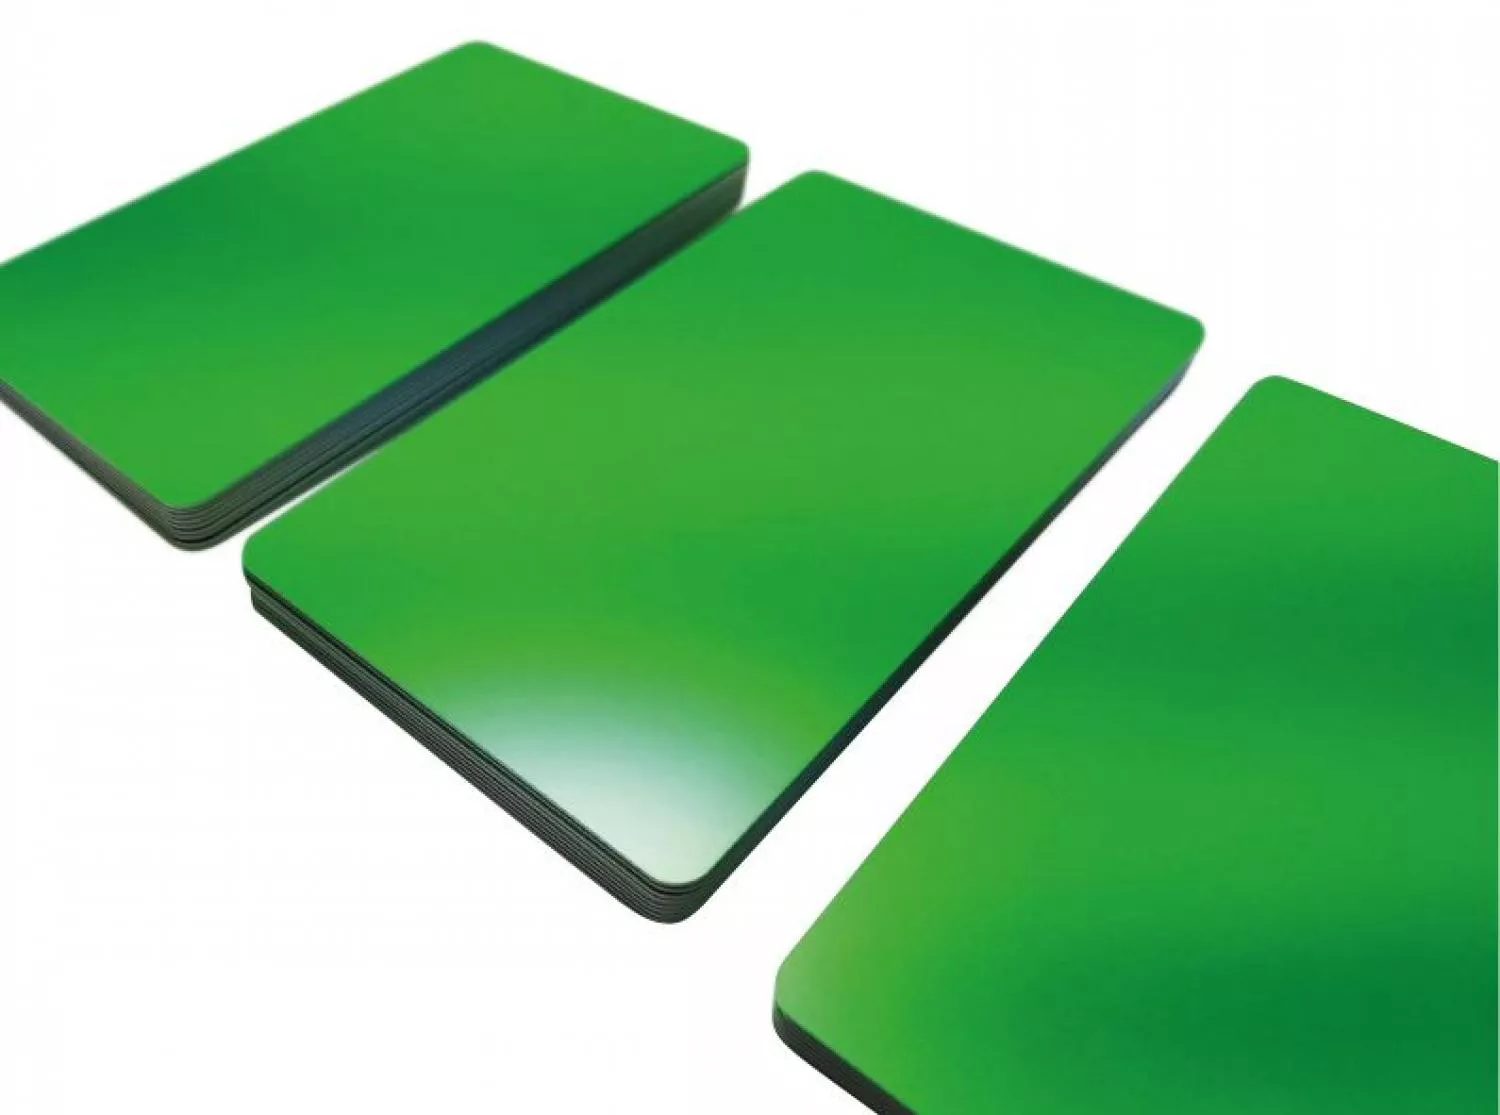 plastic card green matte with signature panel